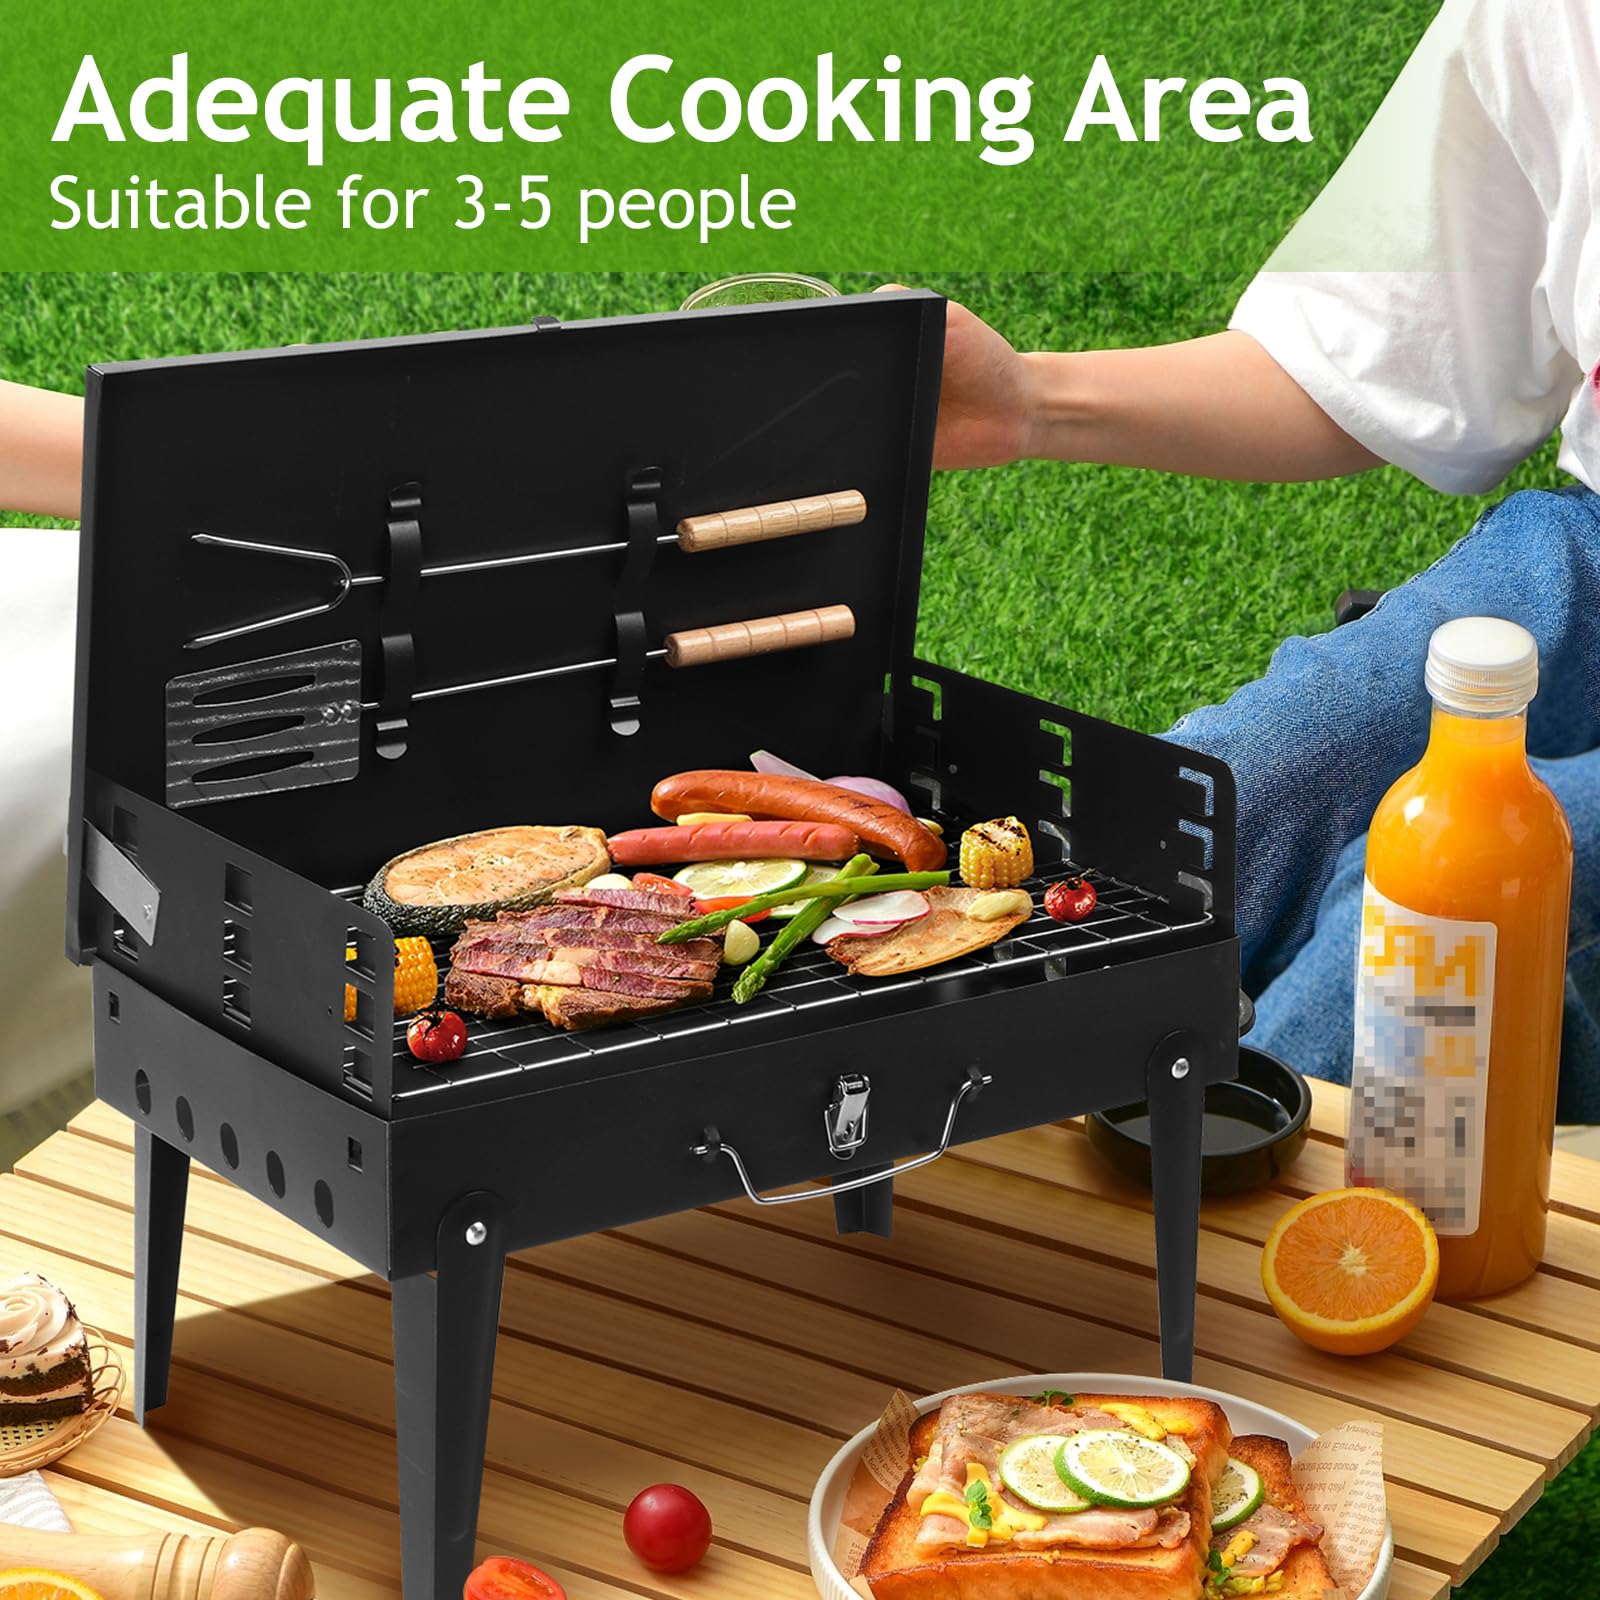 Outvita Portable Charcoal Grill, Outdoor Foldable BBQ Grill with Barbecue Accessories & Lid for Cooking Camping Picnic Hiking Beach Party Patio Smokers, Height Adjustable for 3 to 5 People